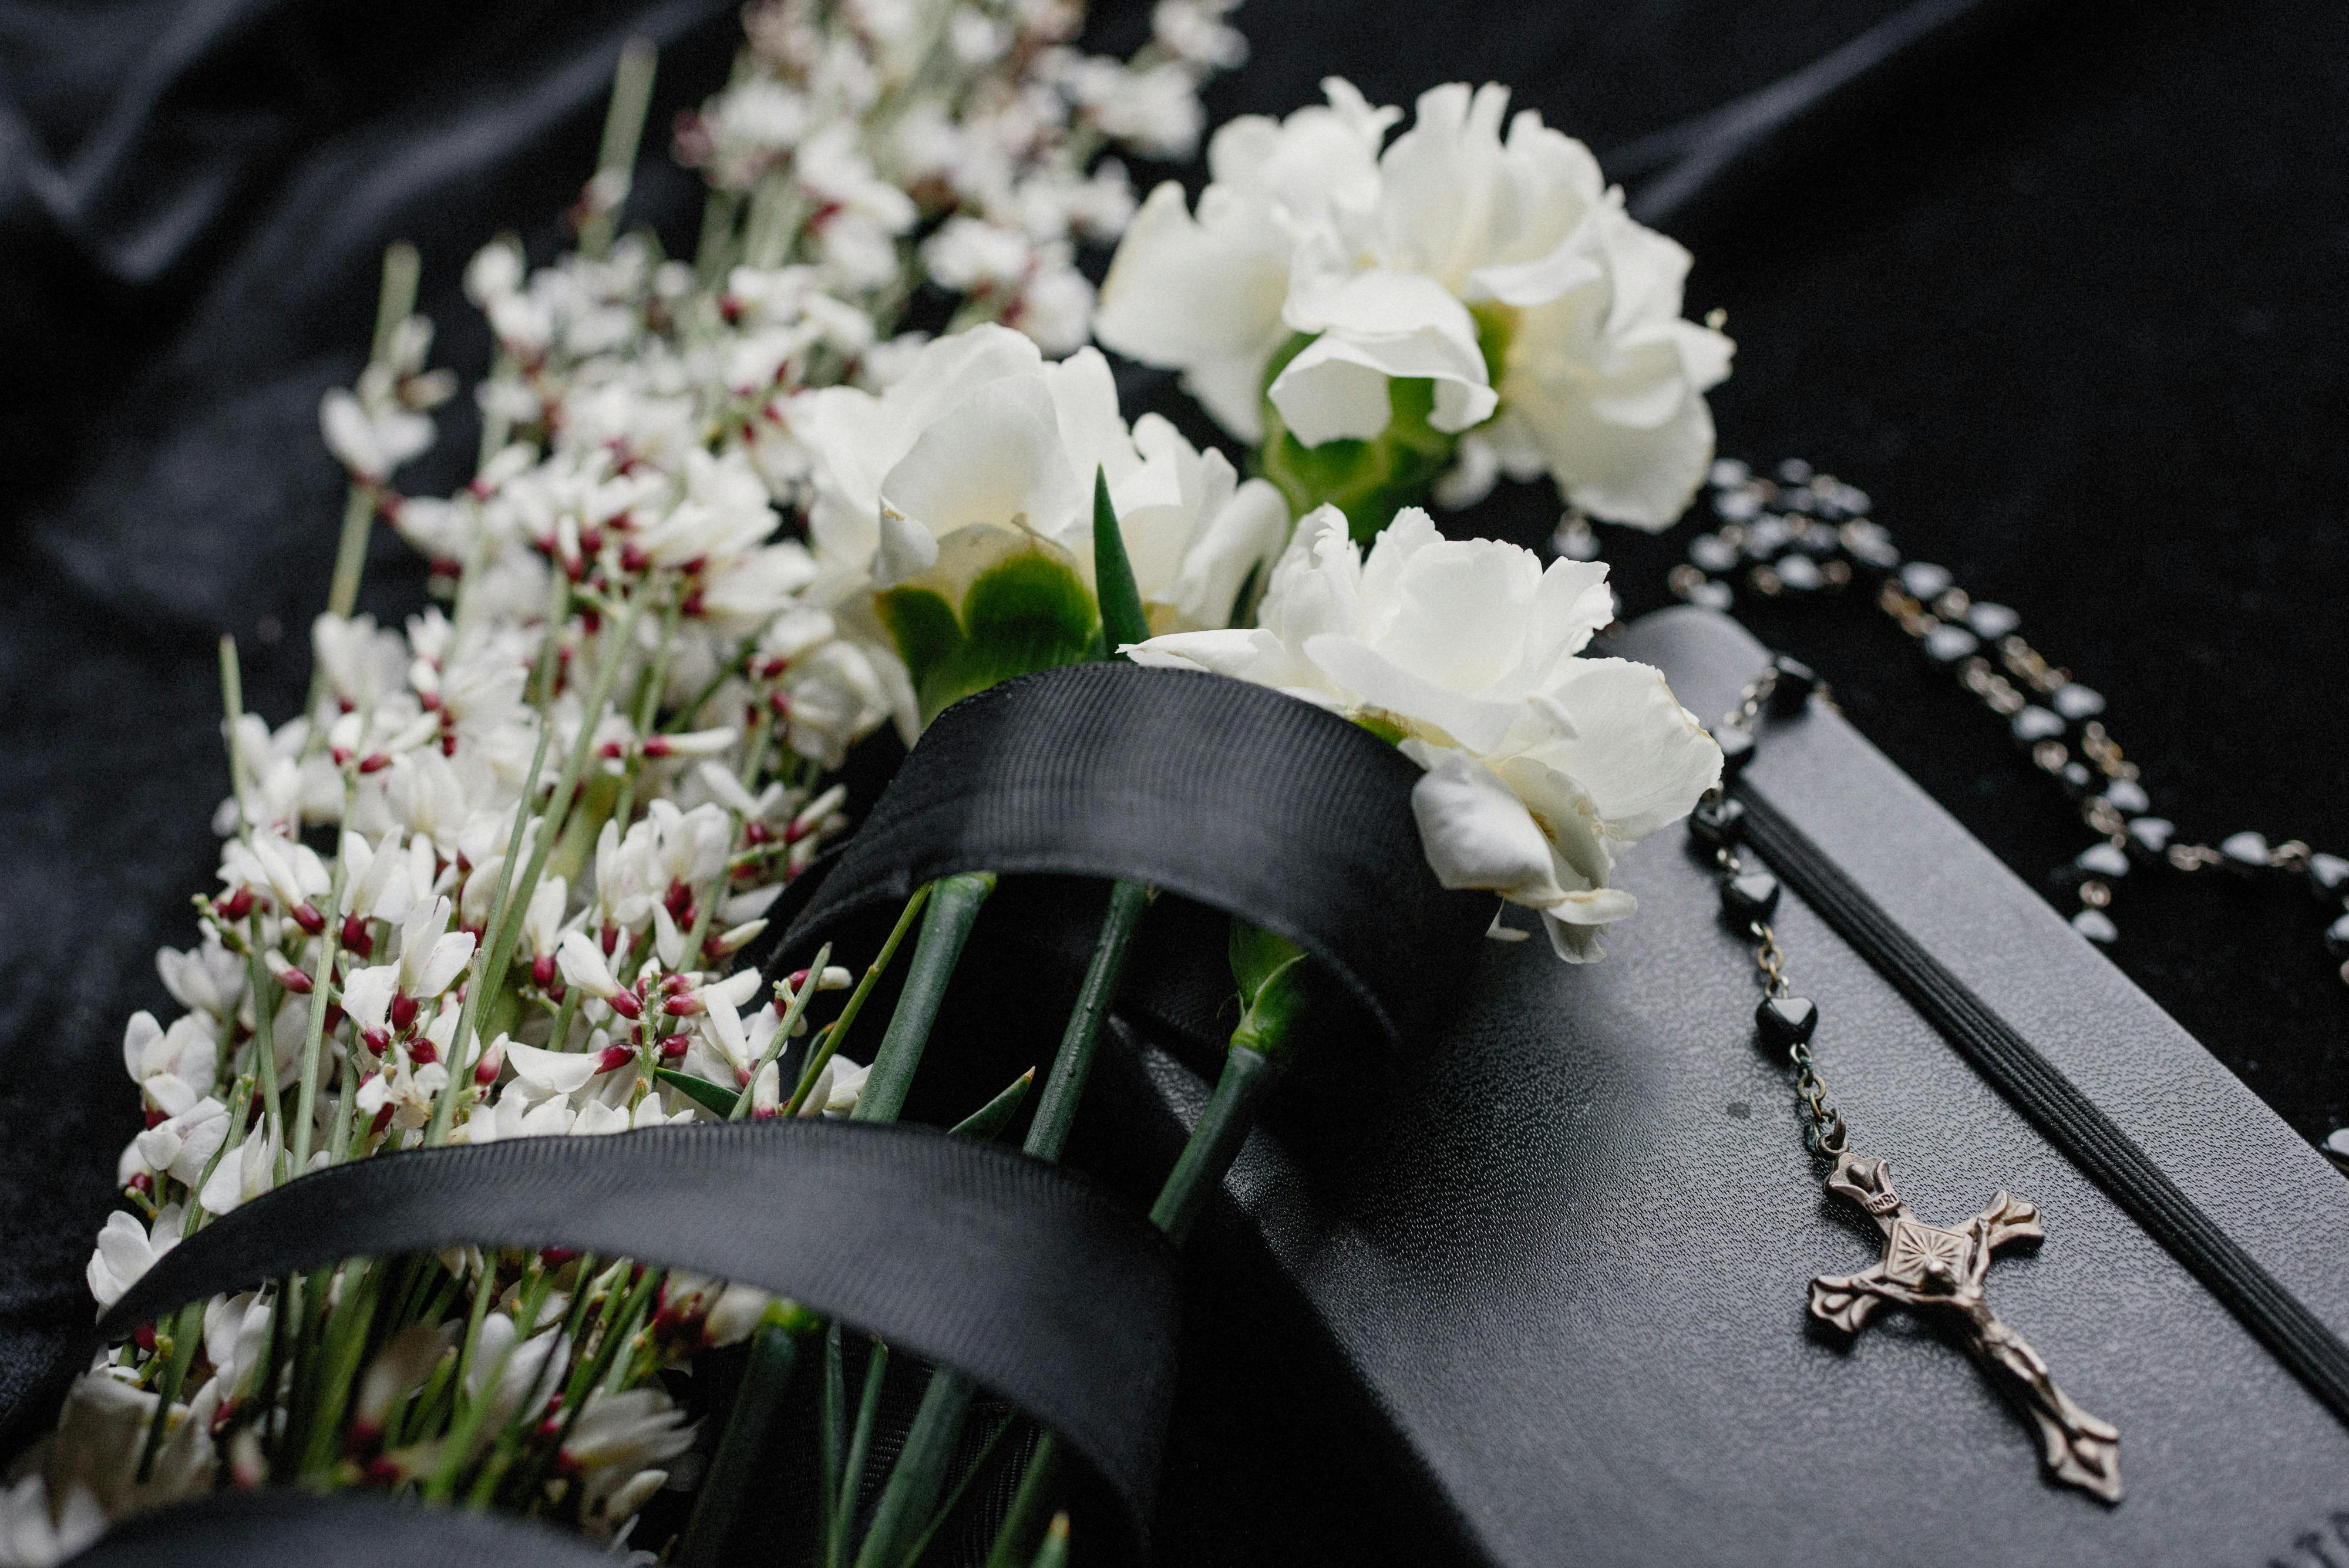 Funeral Backgrounds Pictures - Wallpaper Cave